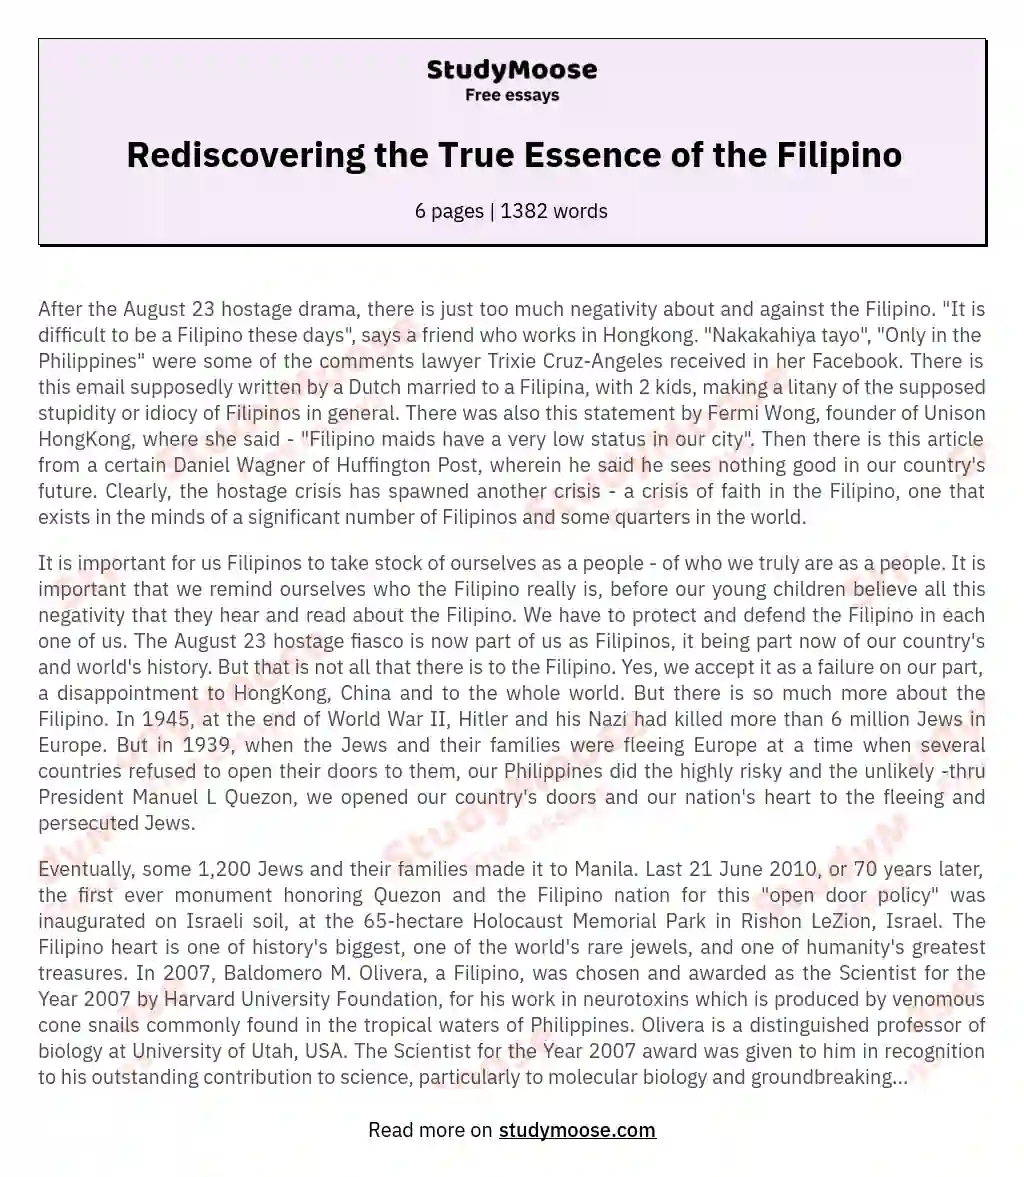 Rediscovering the True Essence of the Filipino essay